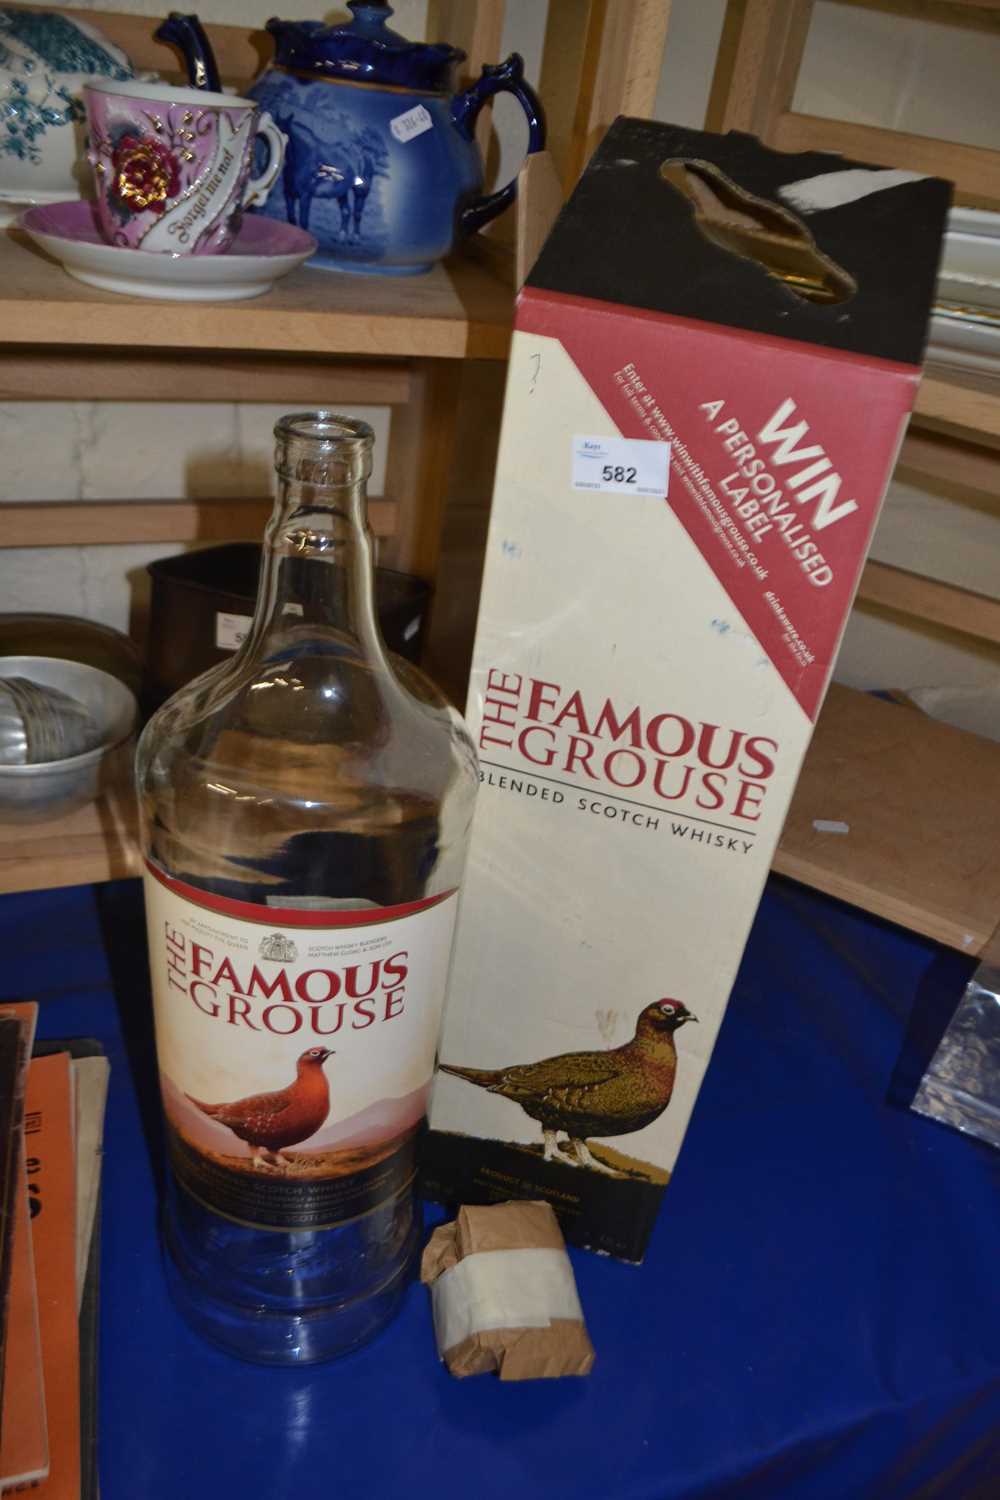 Famous Grouse Whisky 4.5 litre bottle with box - empty